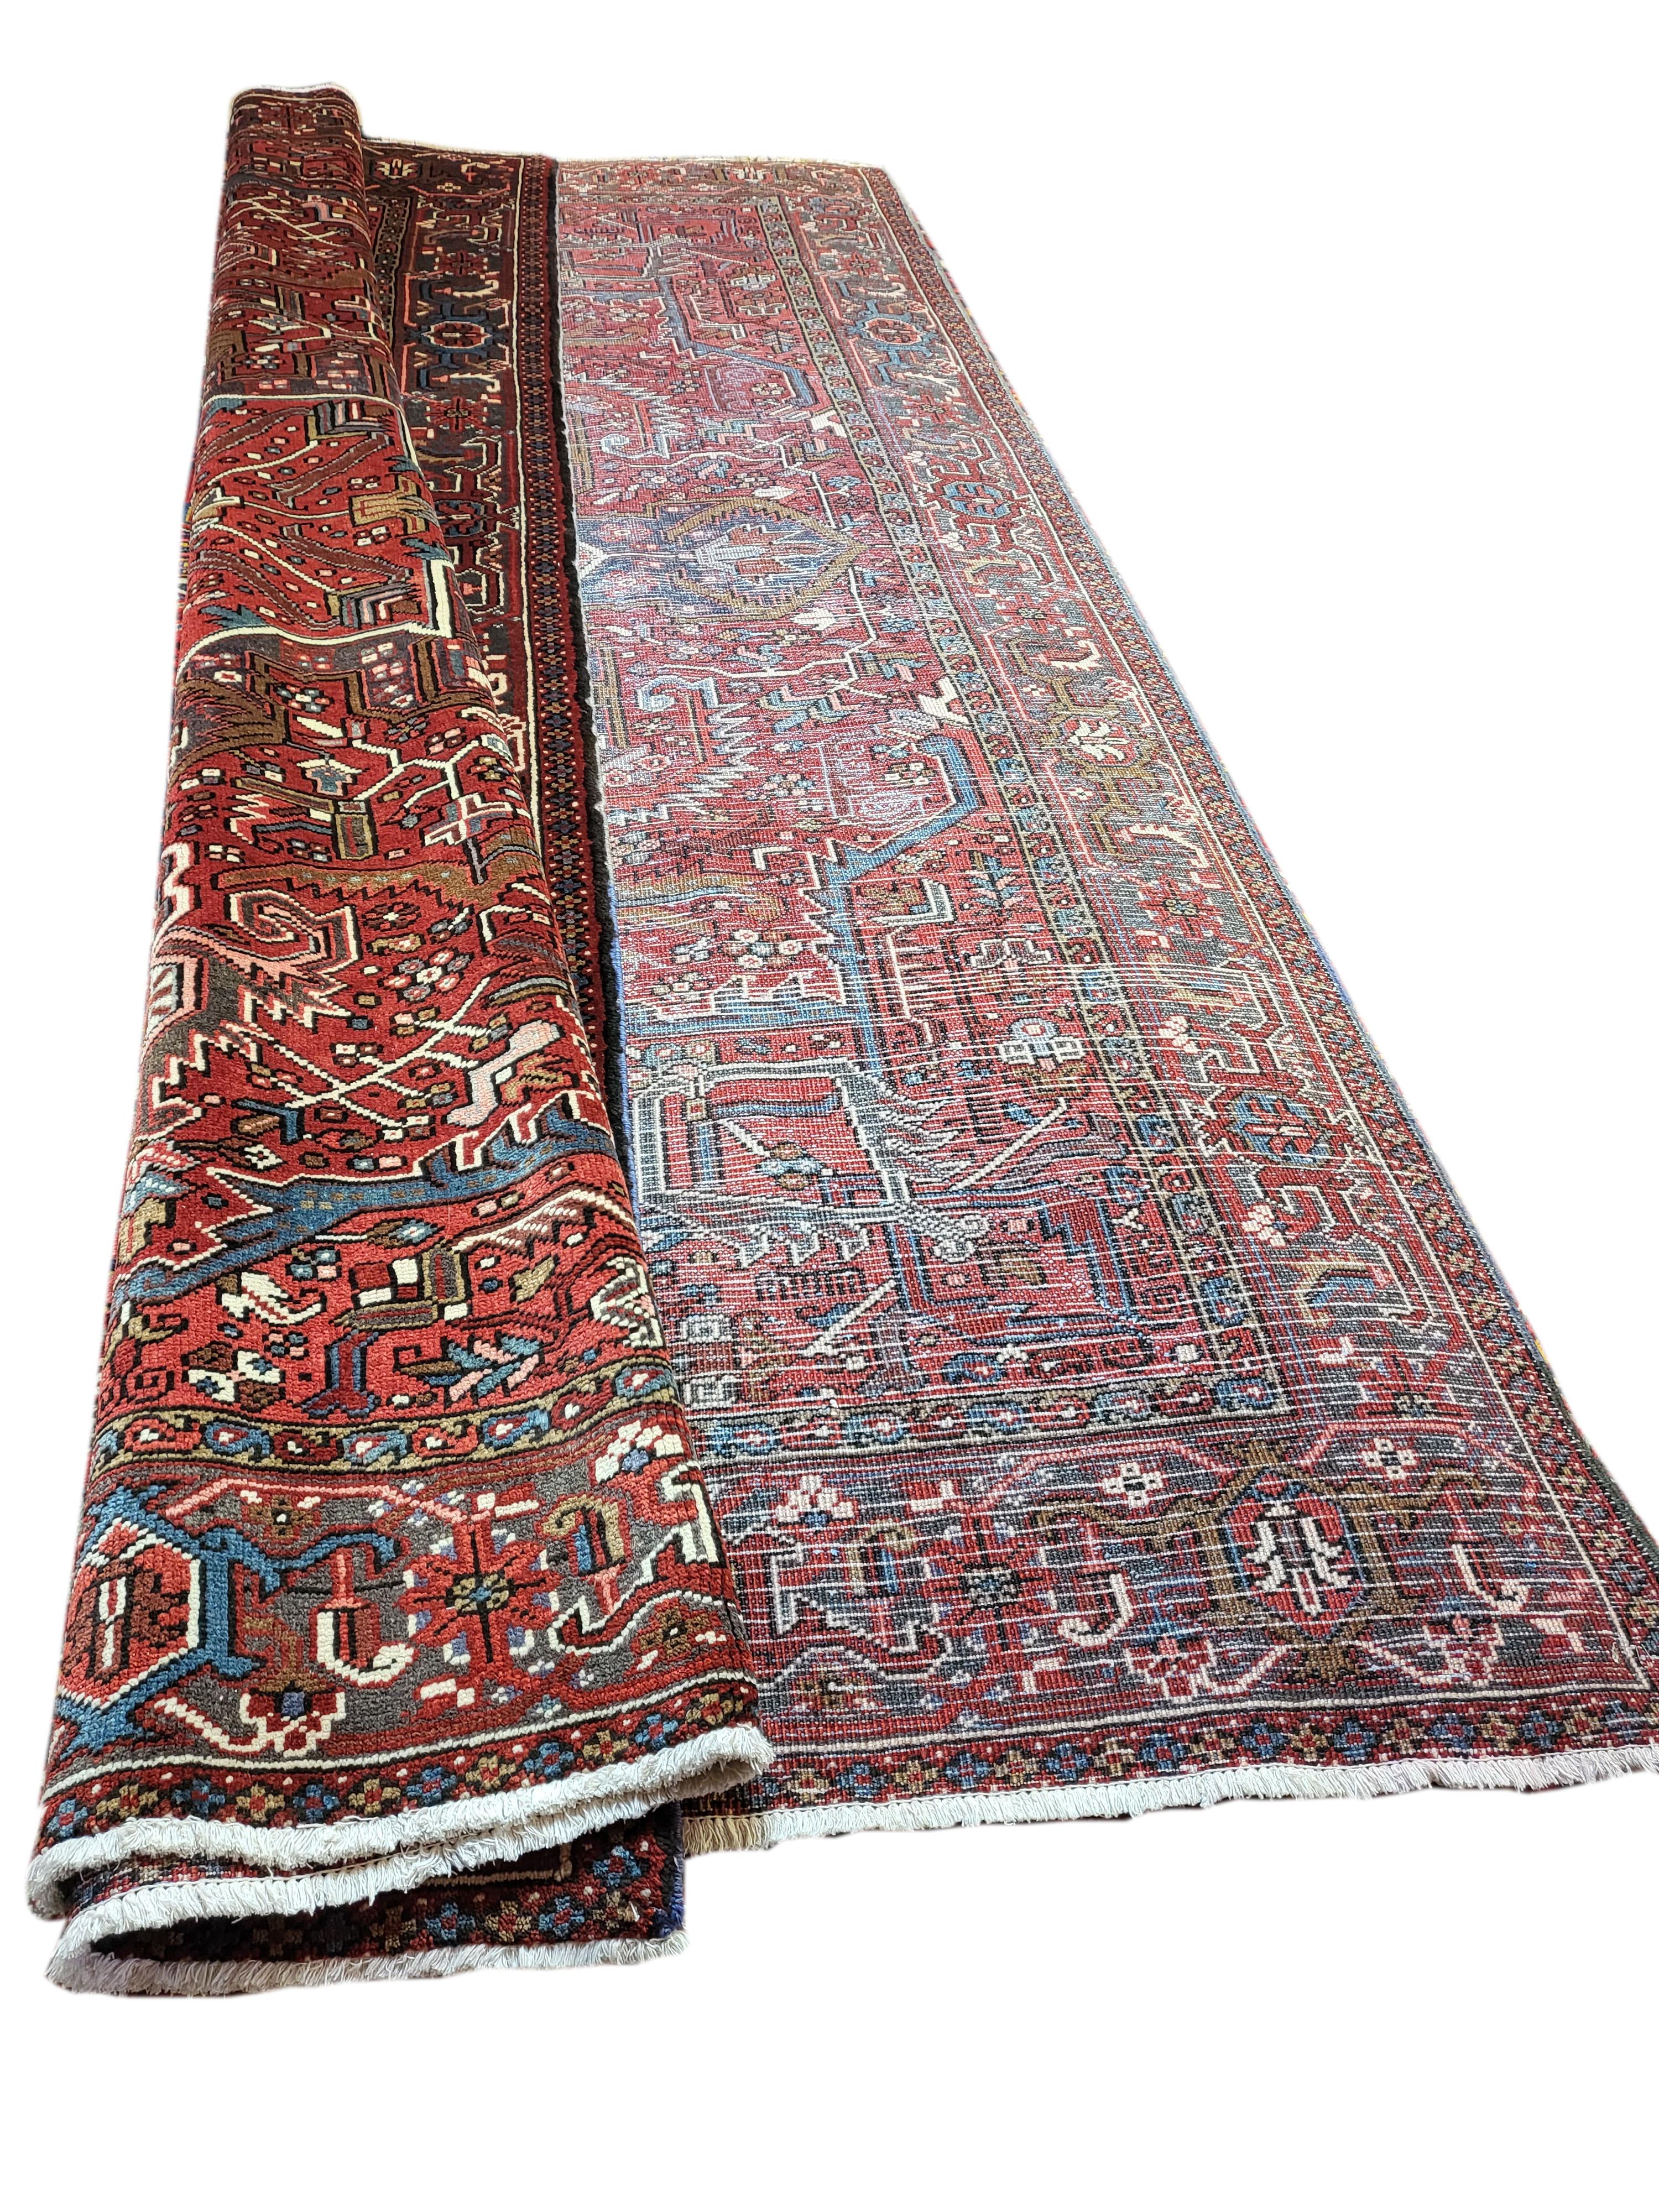 Beautiful, rusty Persian Heriz. Heriz's are the number one Persian rug in the world and for good reason! they are plush, sturdy and woven with fine wool that glistens in the light. This particular piece if fairly unique do to it's low contrast for